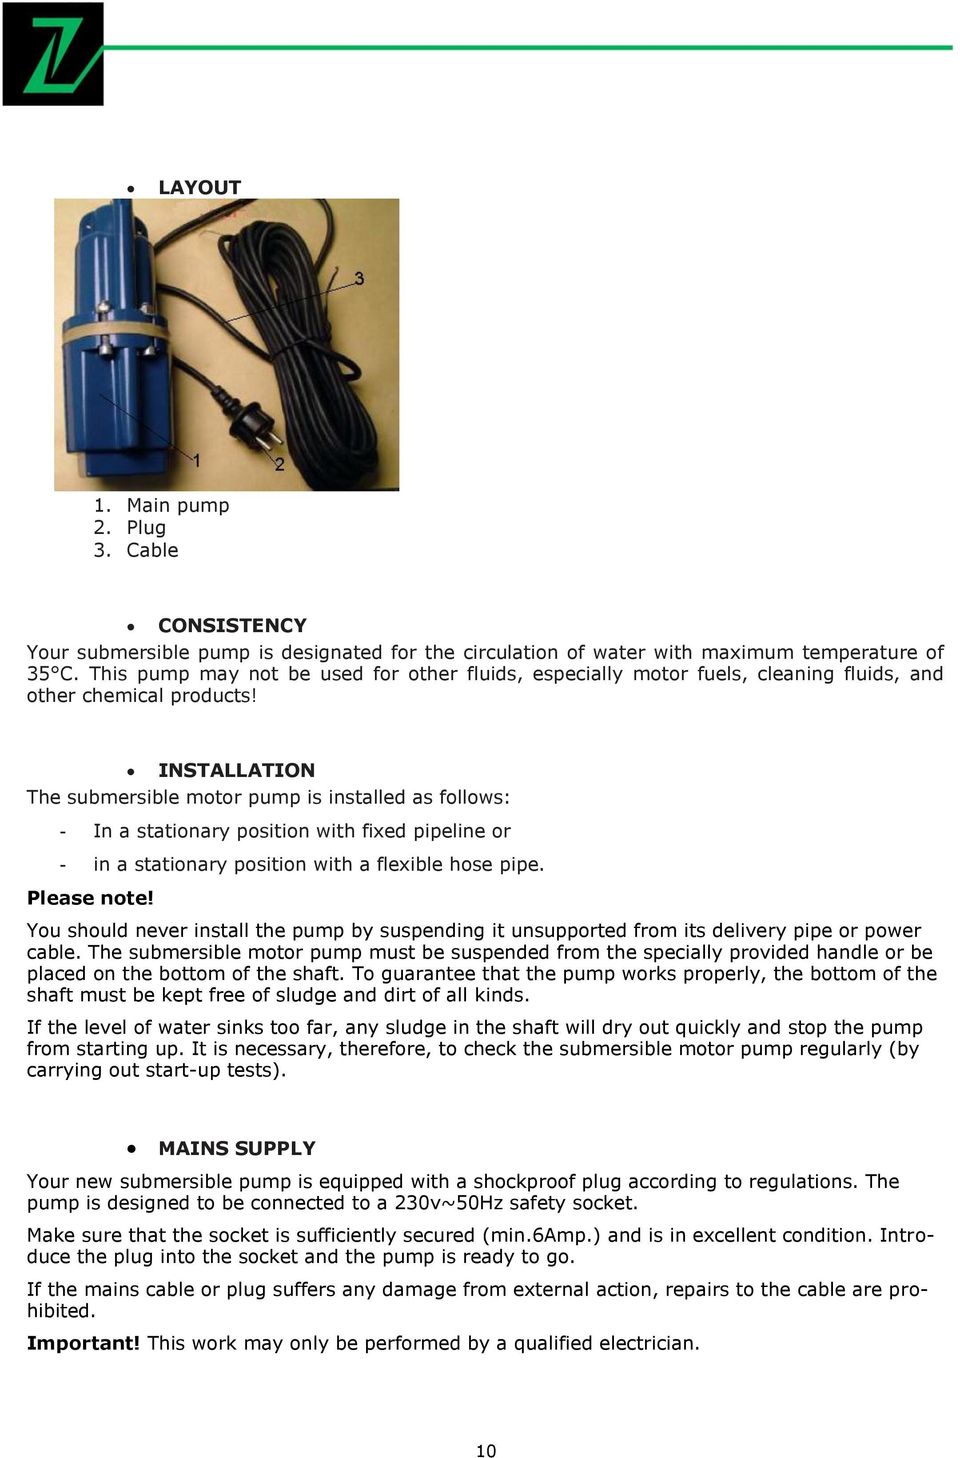 INSTALLATION The submersible motor pump is installed as follows: - In a stationary position with fixed pipeline or - in a stationary position with a flexible hose pipe. Please note!